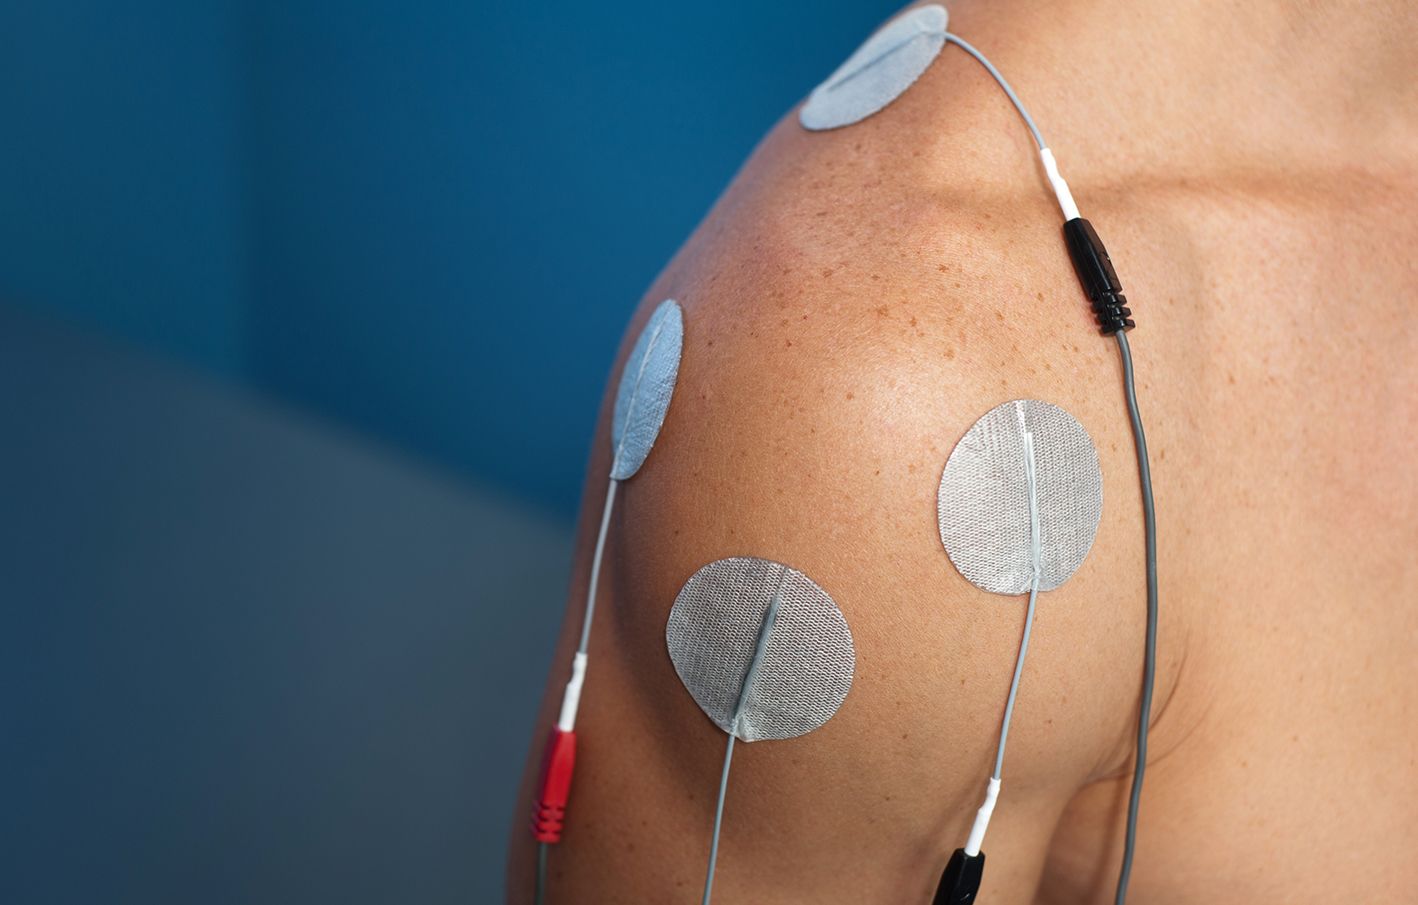 Electrical muscle stimulation